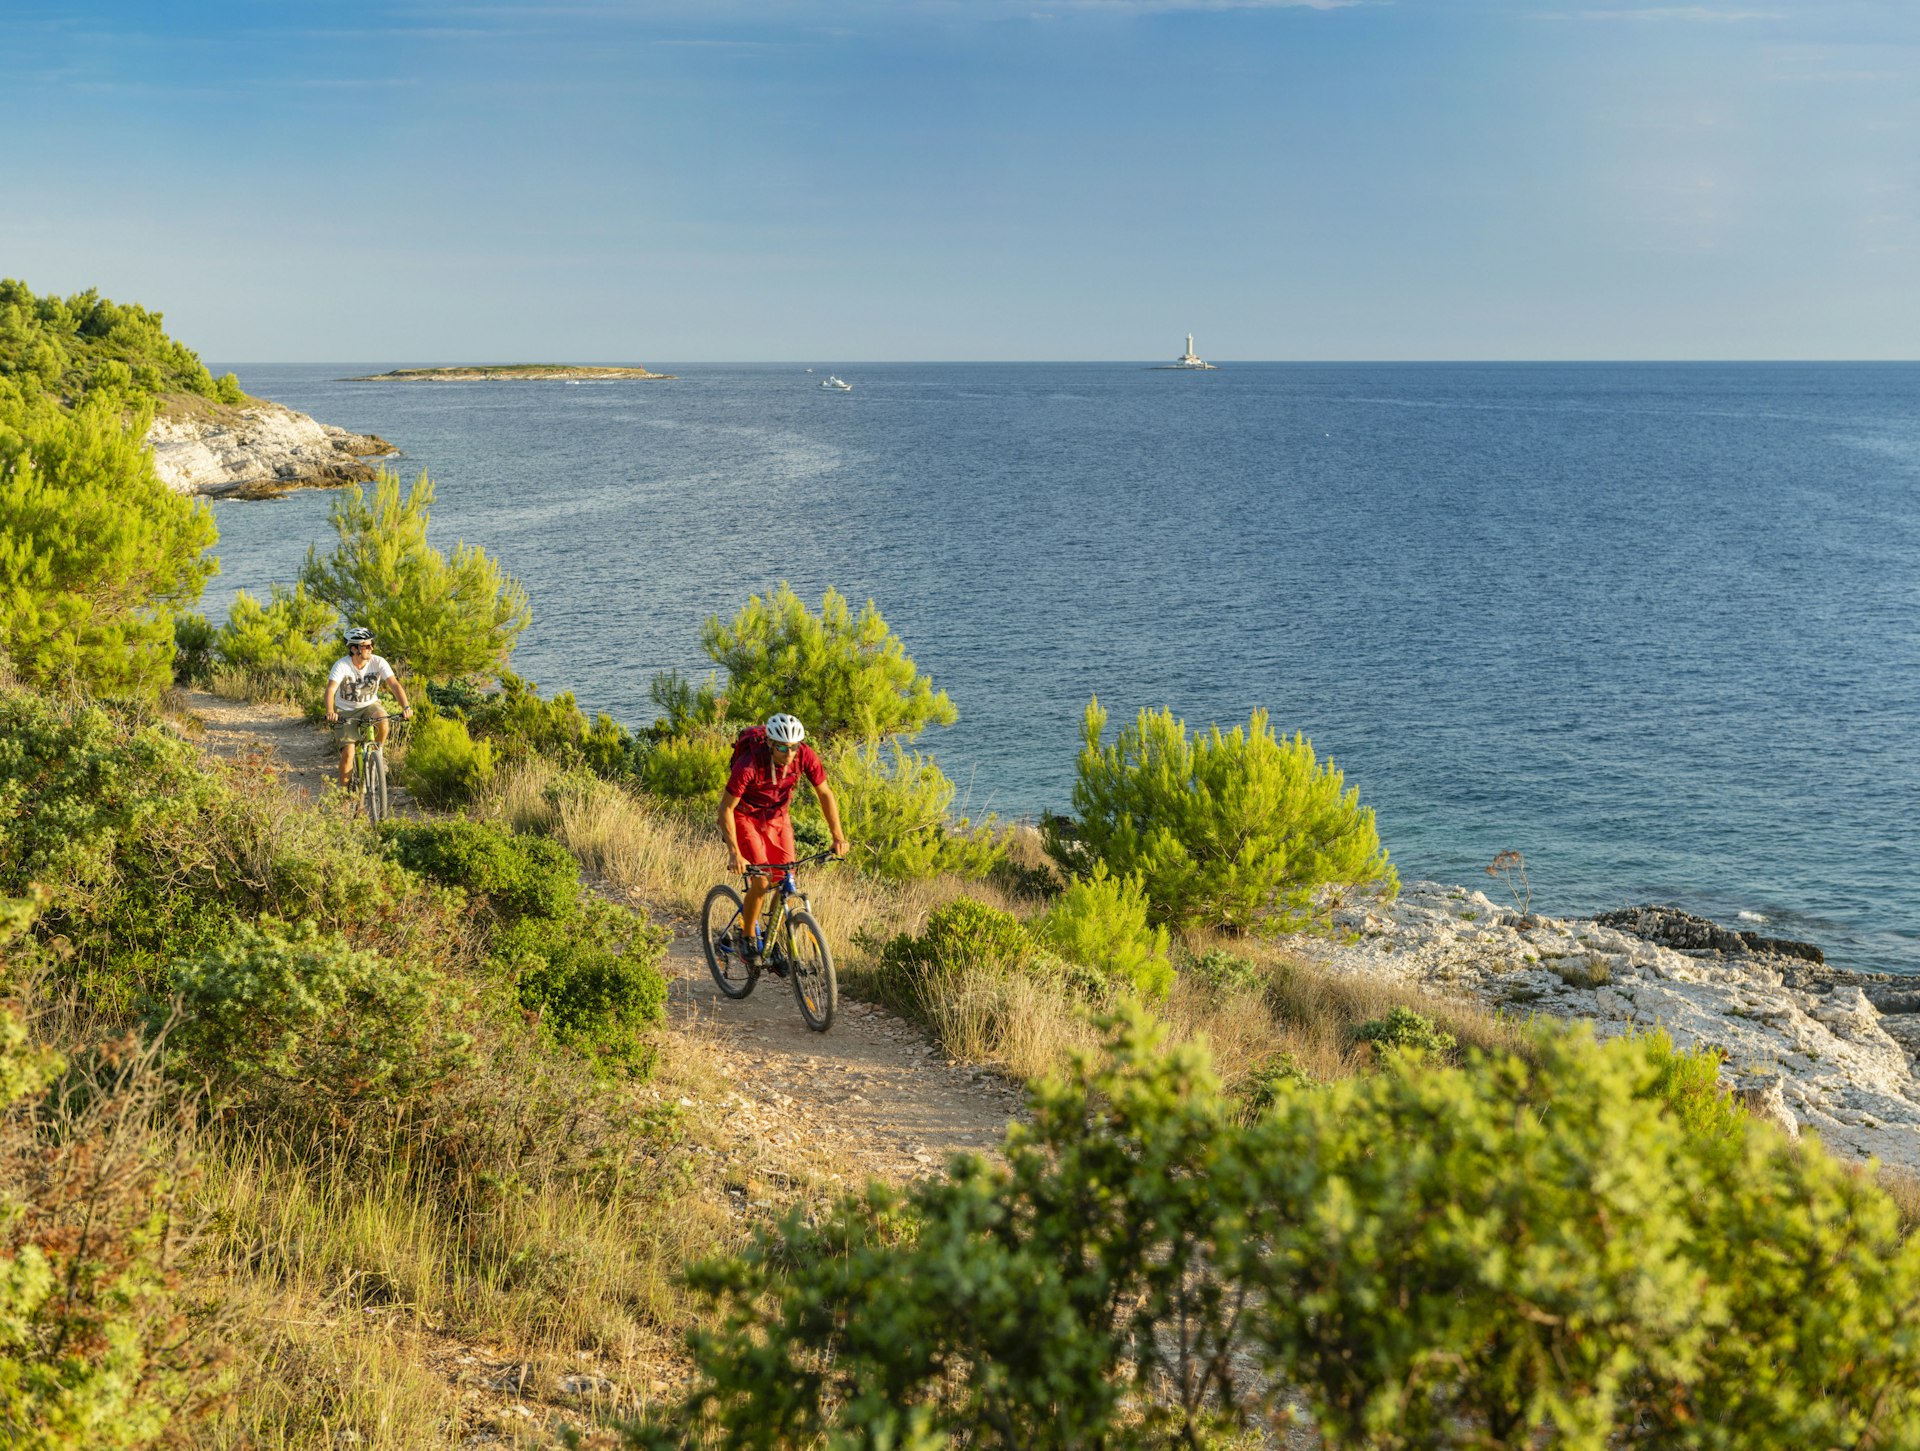 Cyclists on trails at Cape Kamenjak, which follows the rocky coastline.